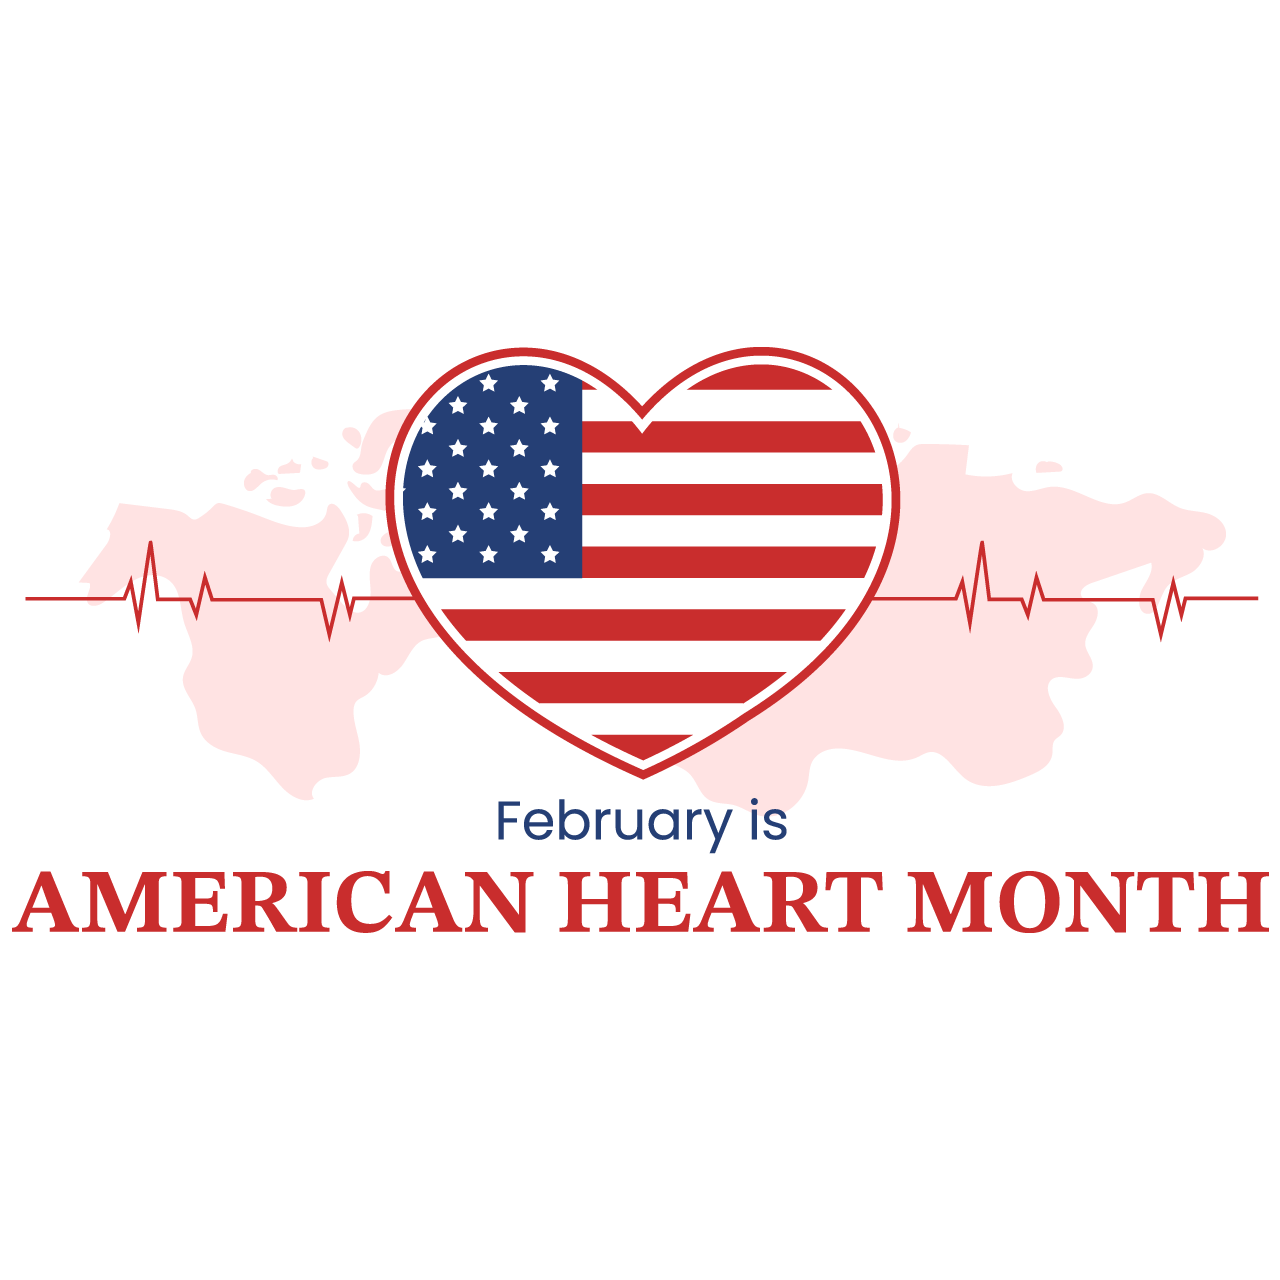 February is american heart month with pulse overcoming cardiovascular disease illustration